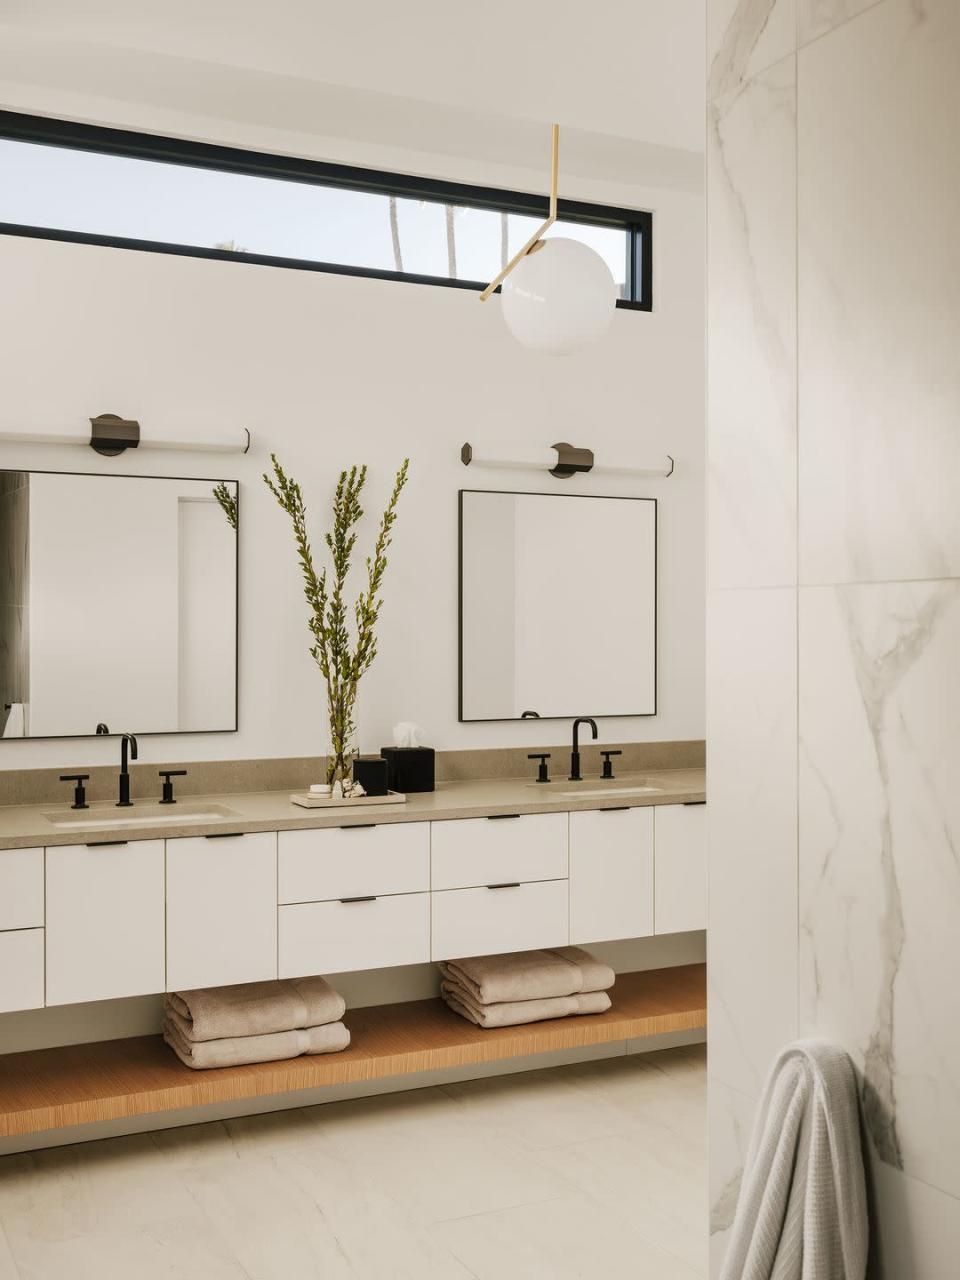 Interior Designers Say These Will Be the Top Bathroom Design Trends of 2022